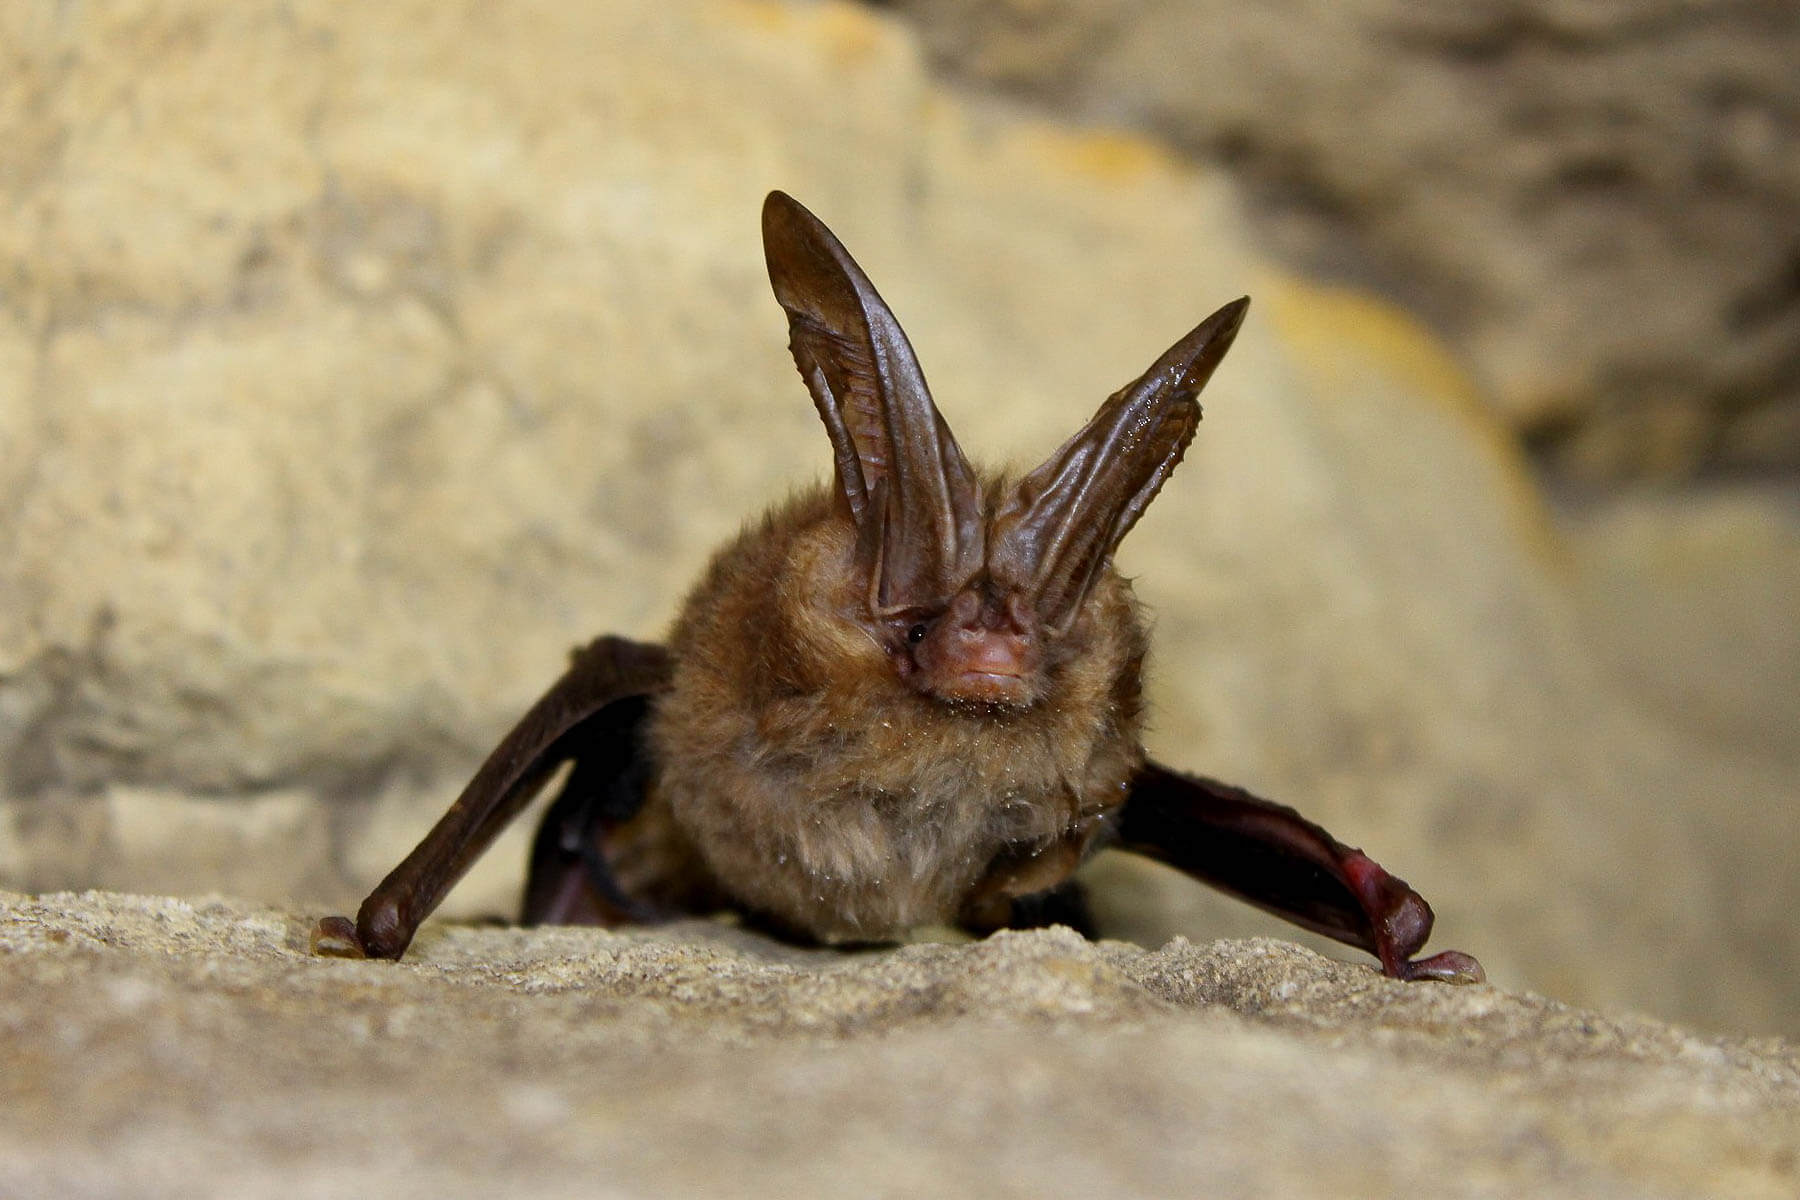 The Virginia big-eared bat is a tiny bat with large ears.